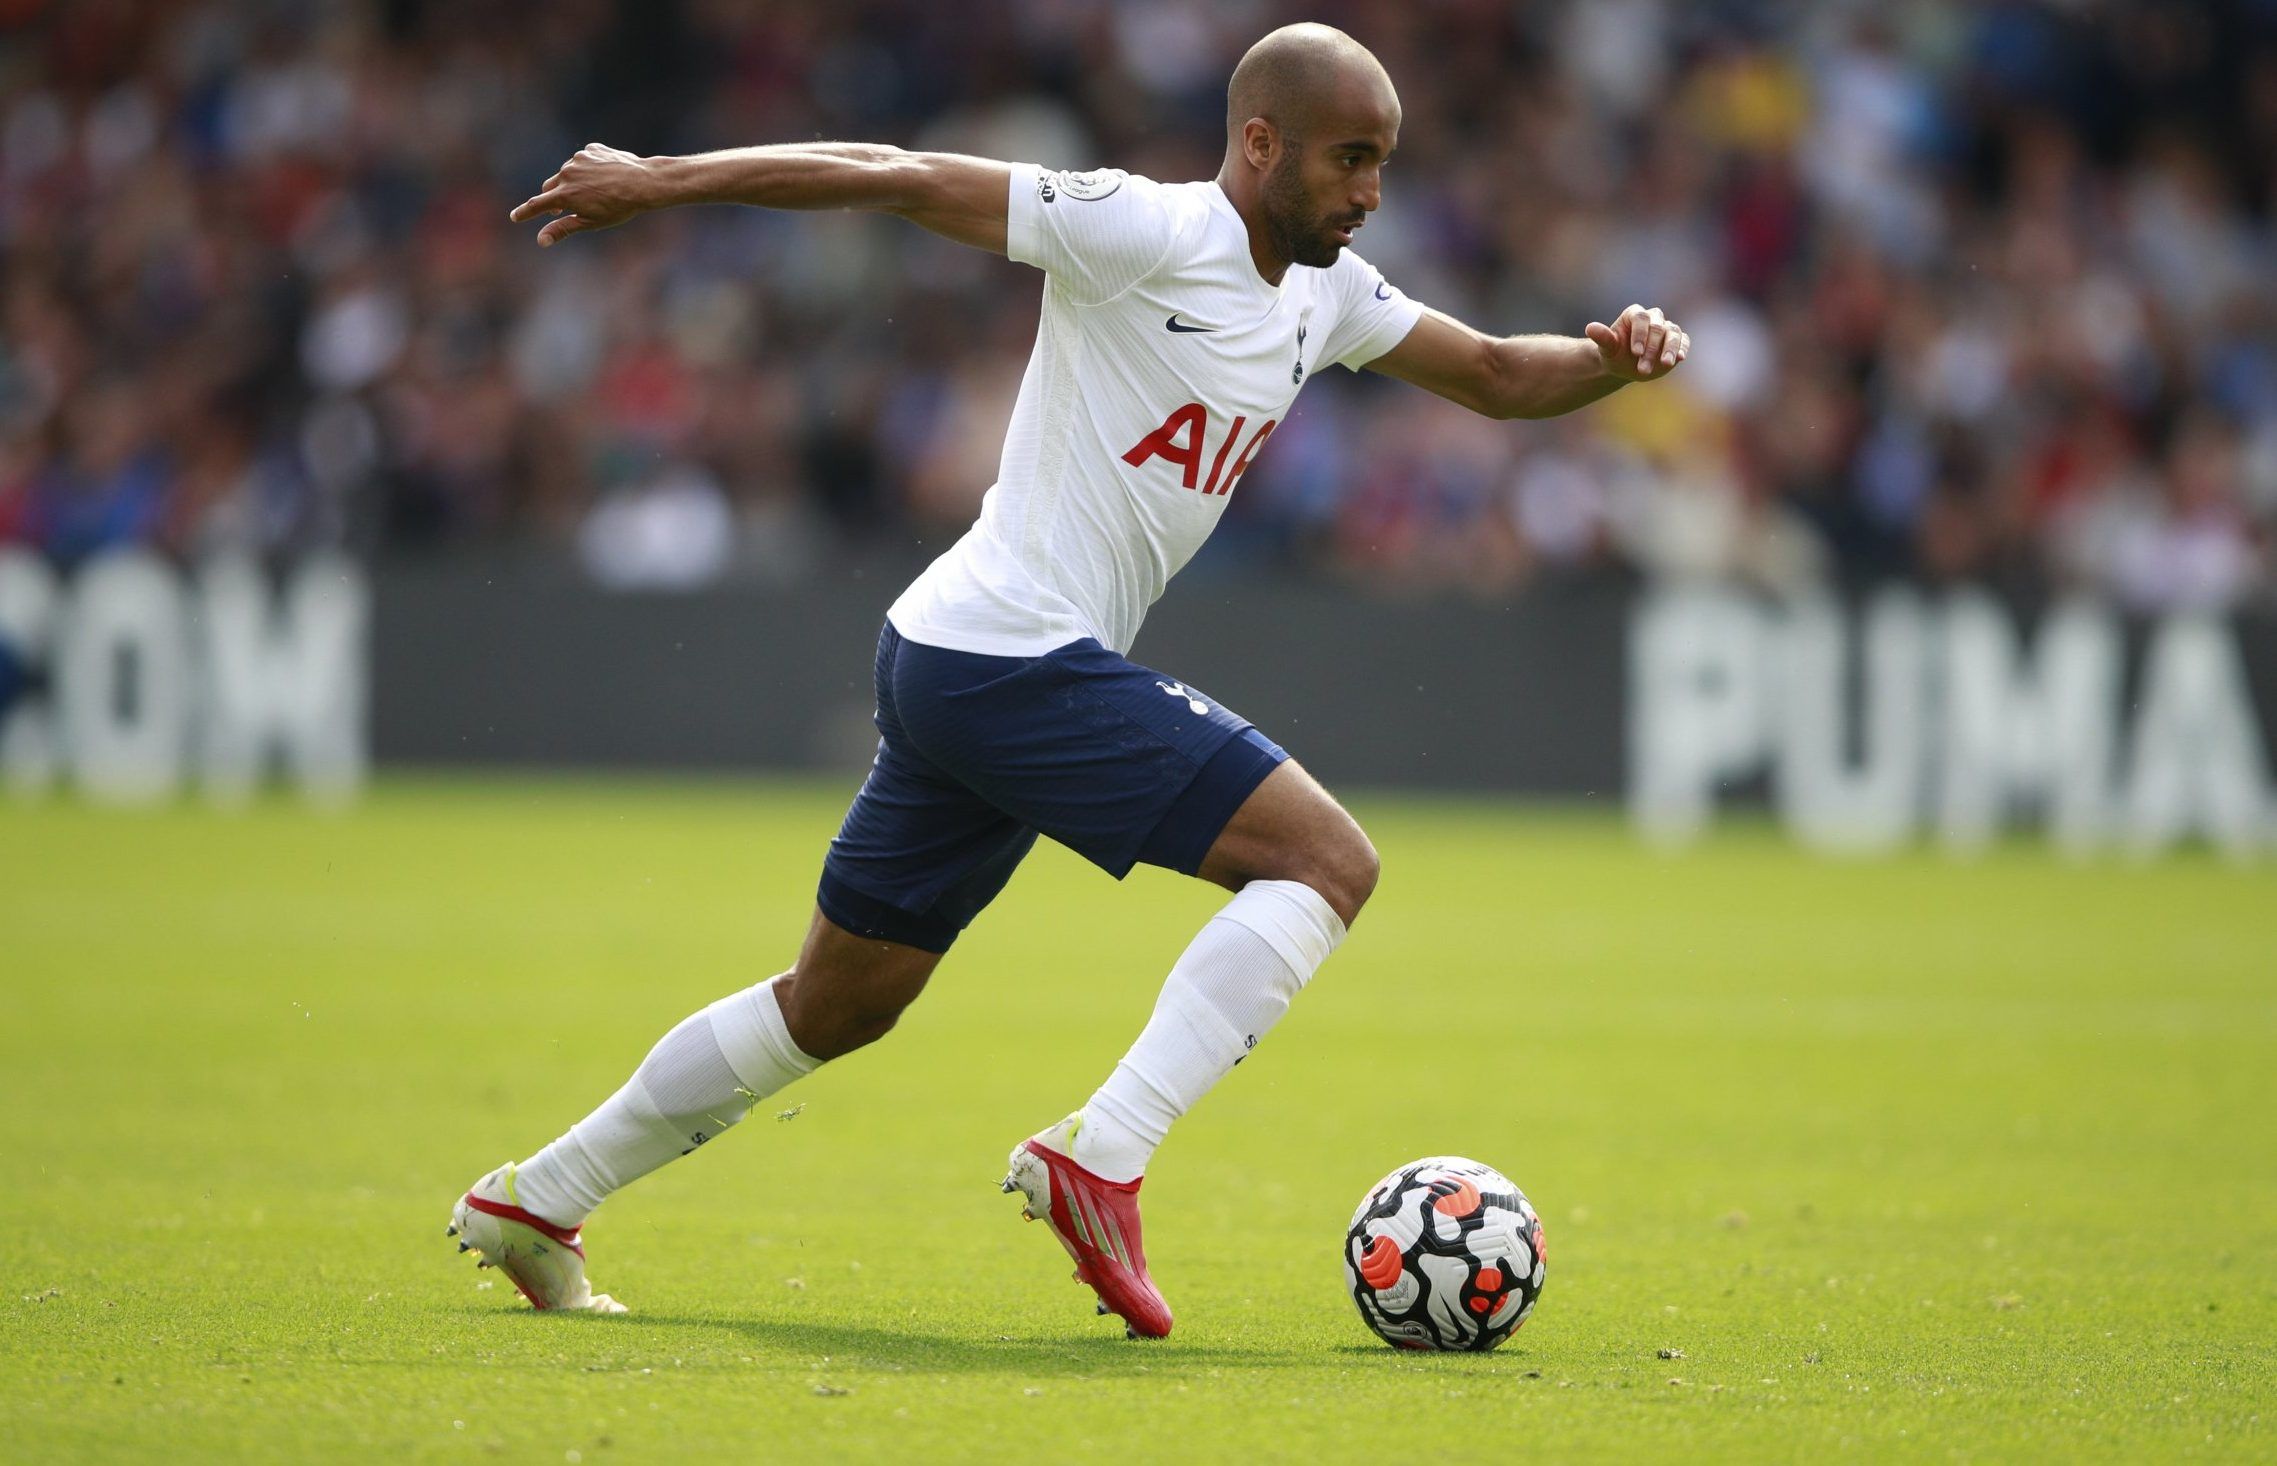 Spurs winger Lucas Moura on the ball against Crystal Palace in the Premier League